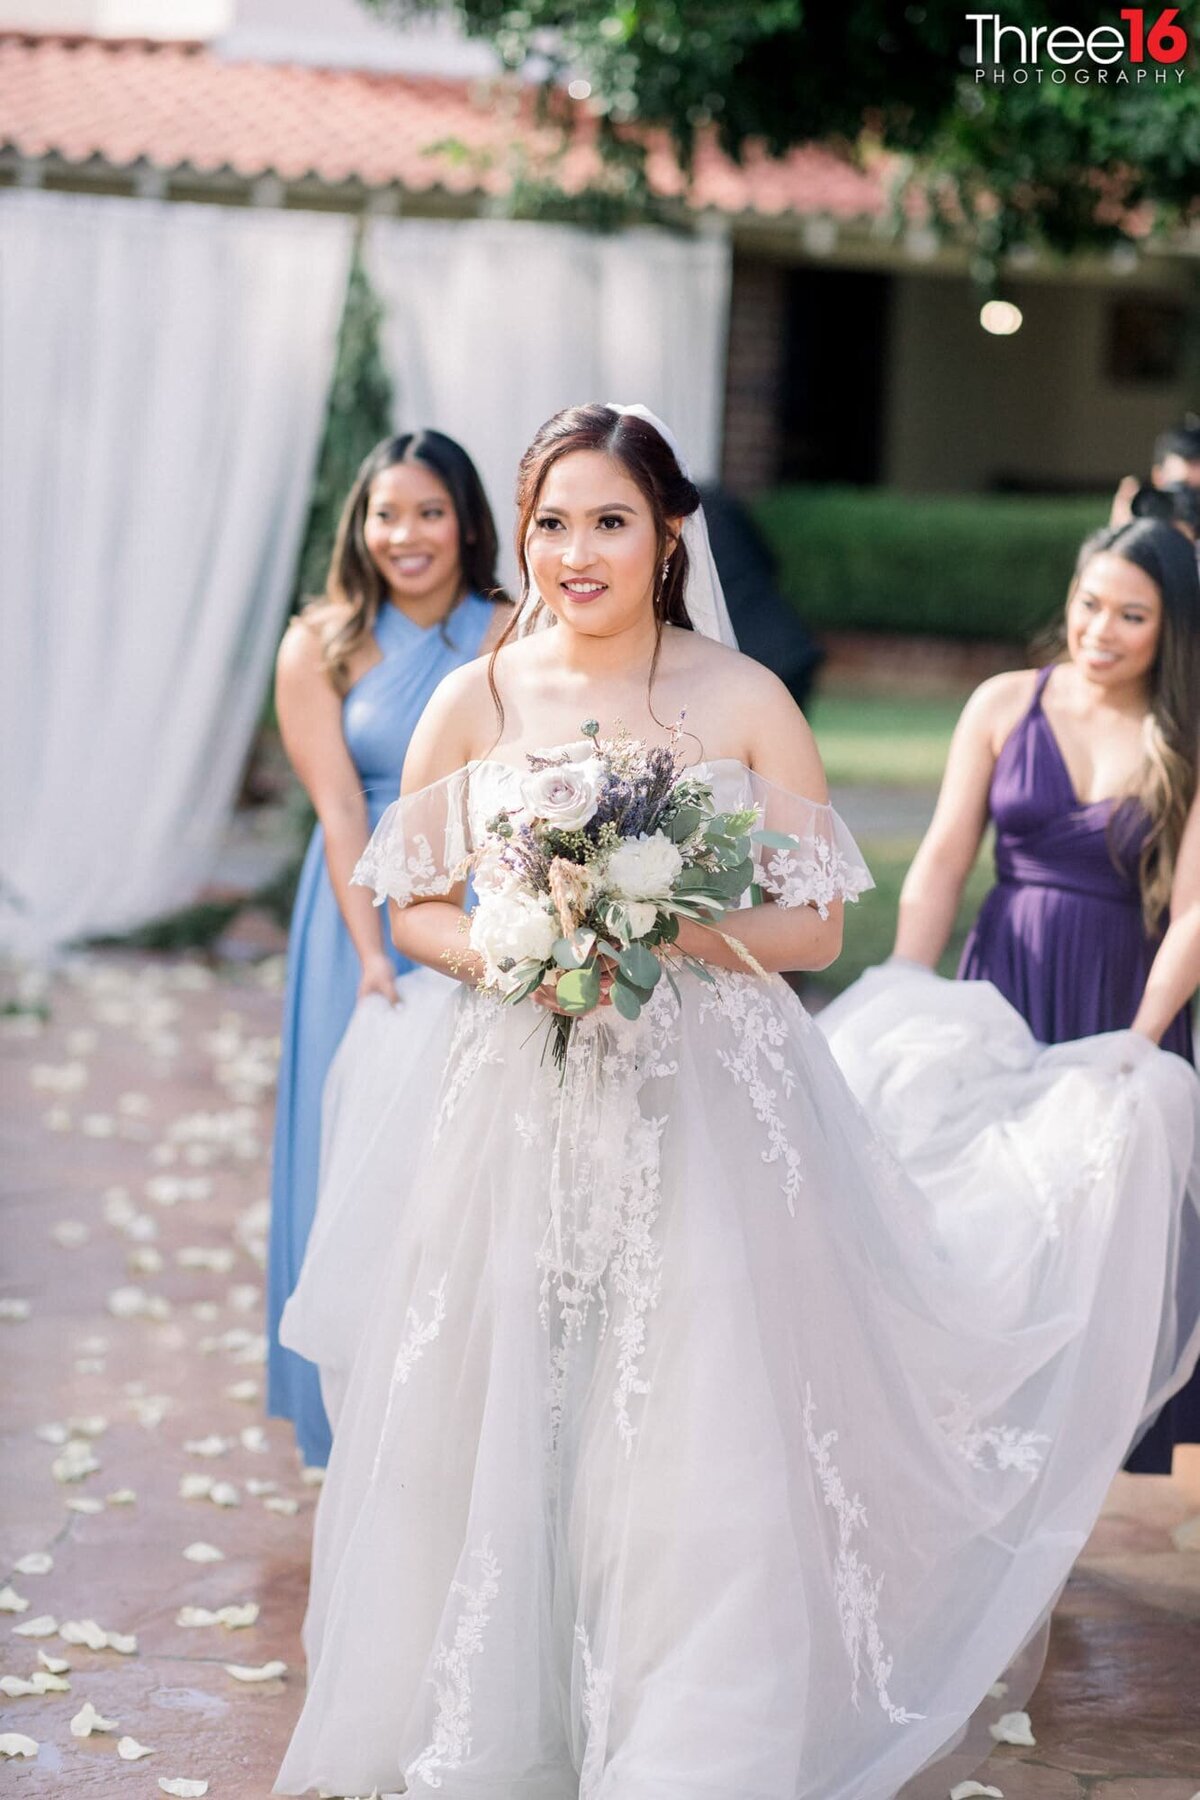 Bride enters as Bridesmaids carry her train so it doesn't drag in the dirt